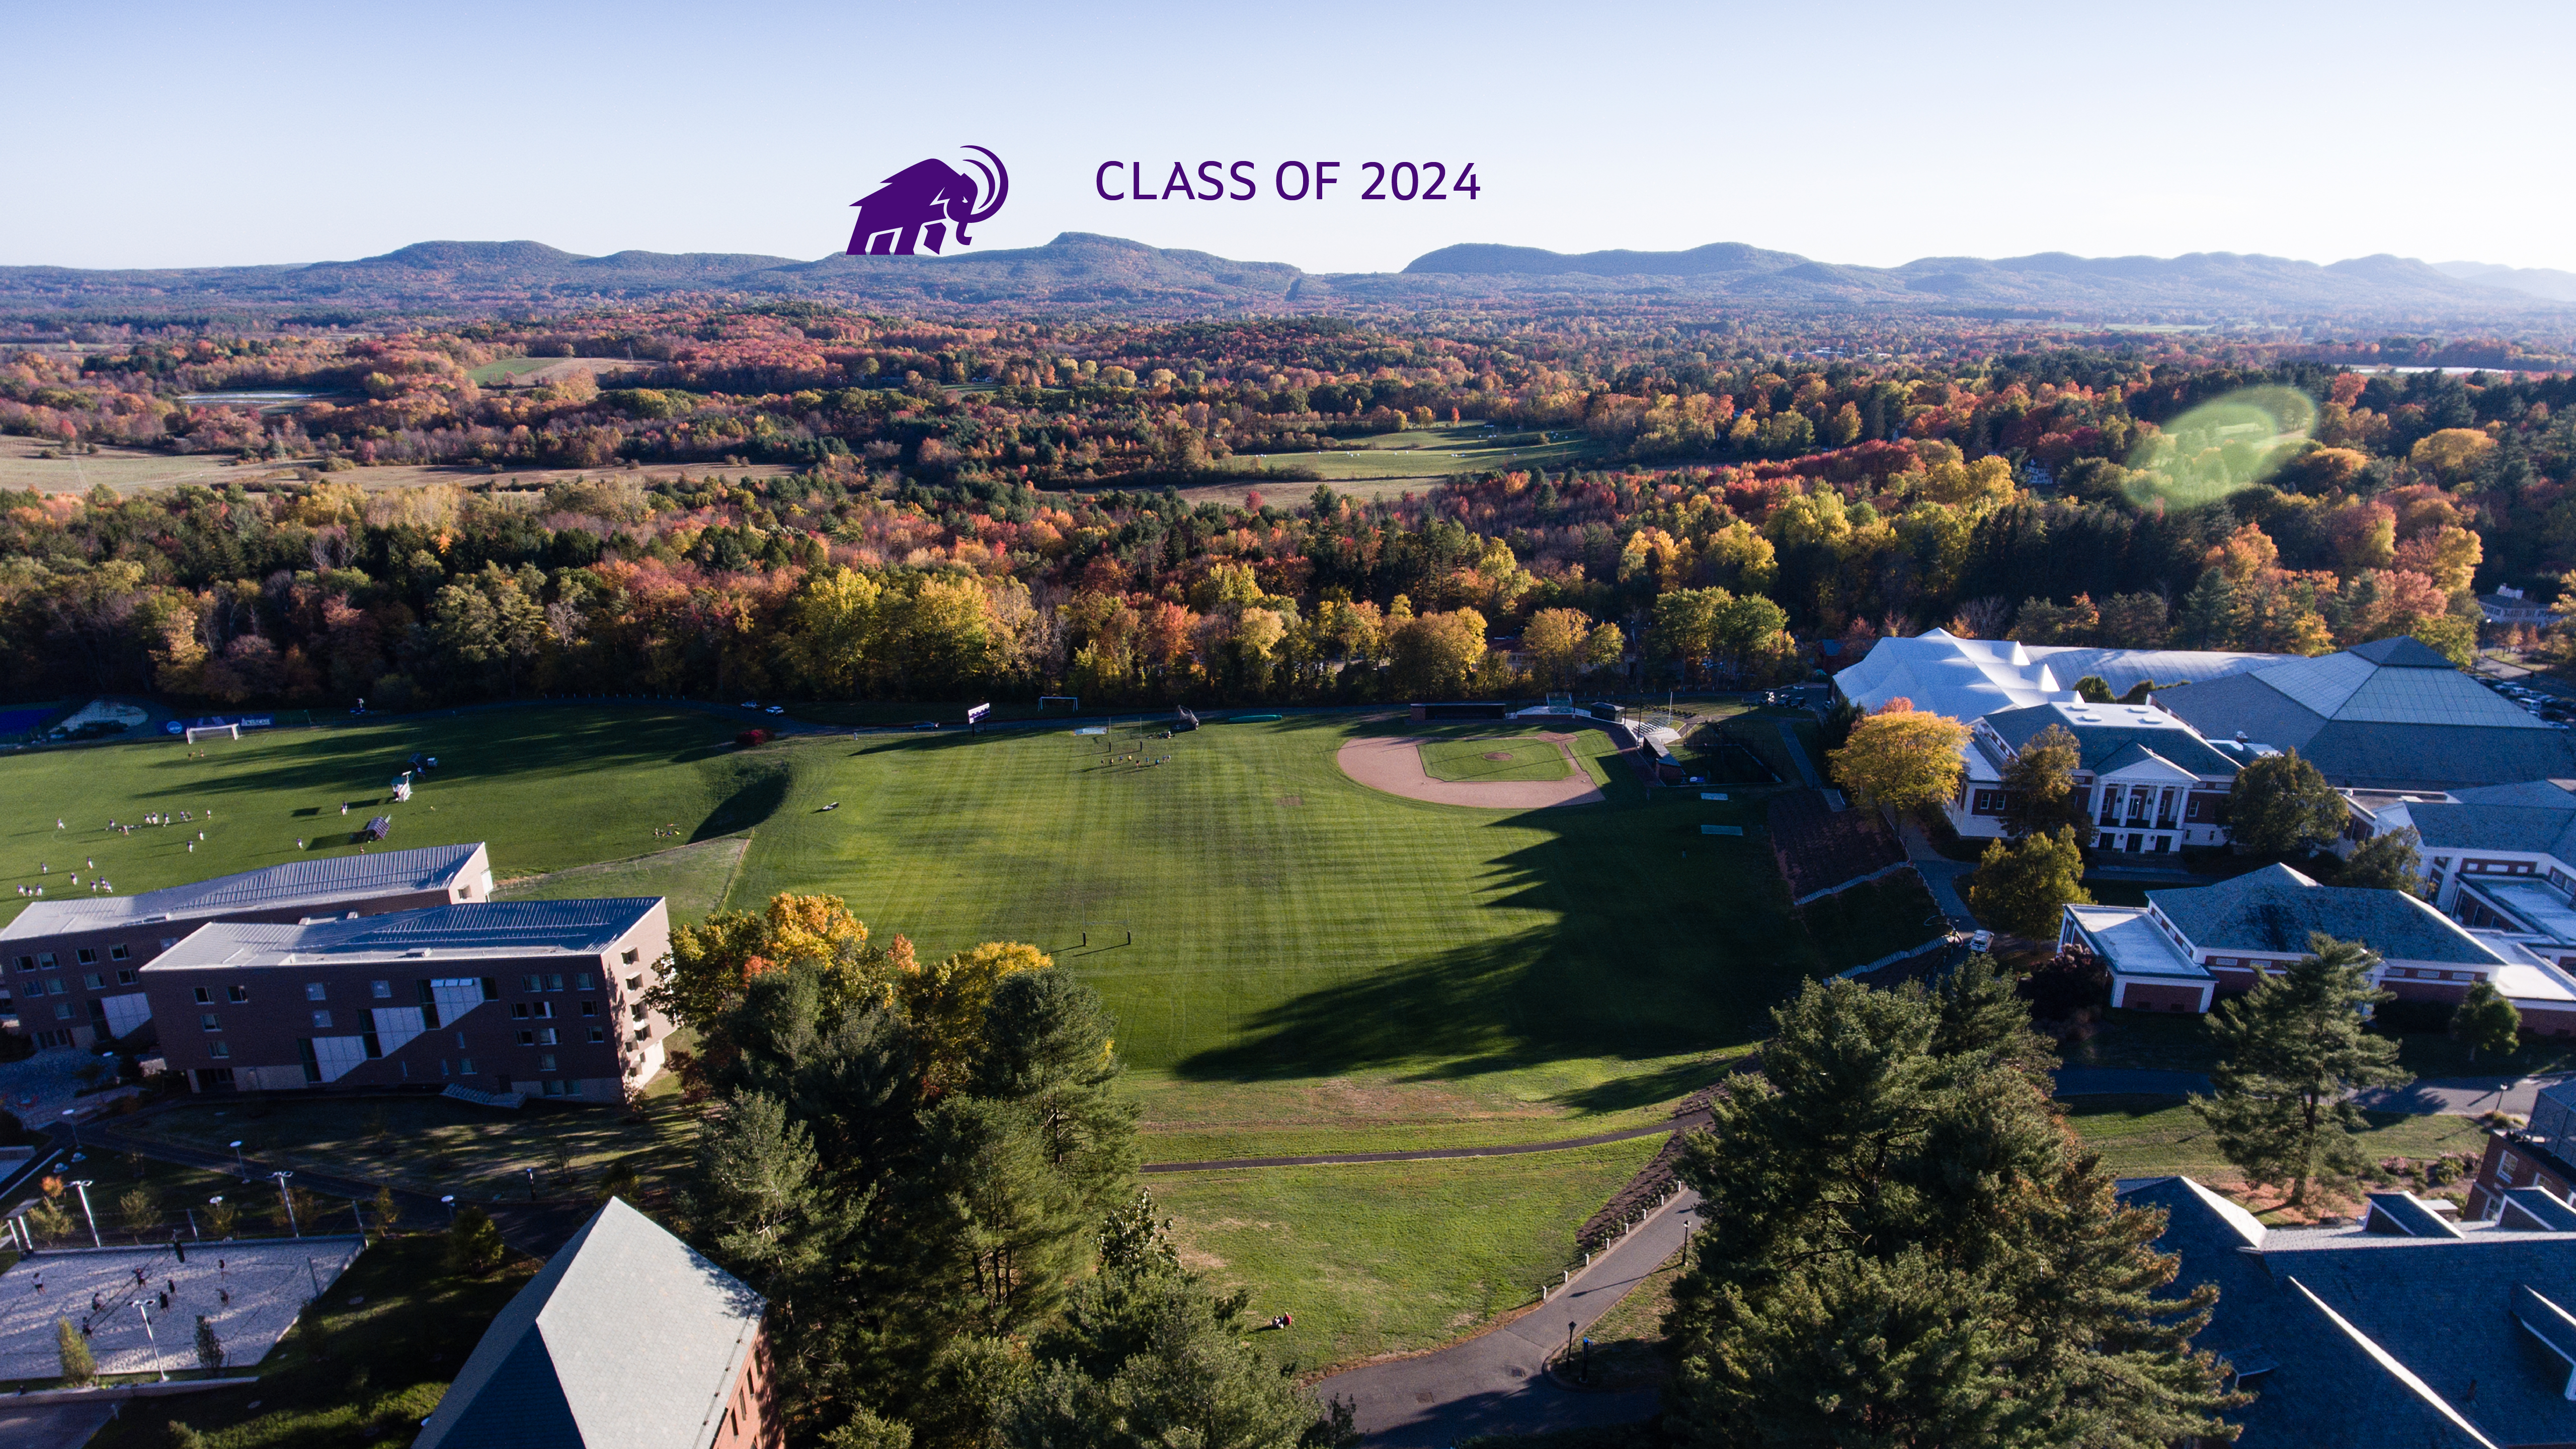 Class of 2024 on an aerial photo of campus with a mammoth walking on the range